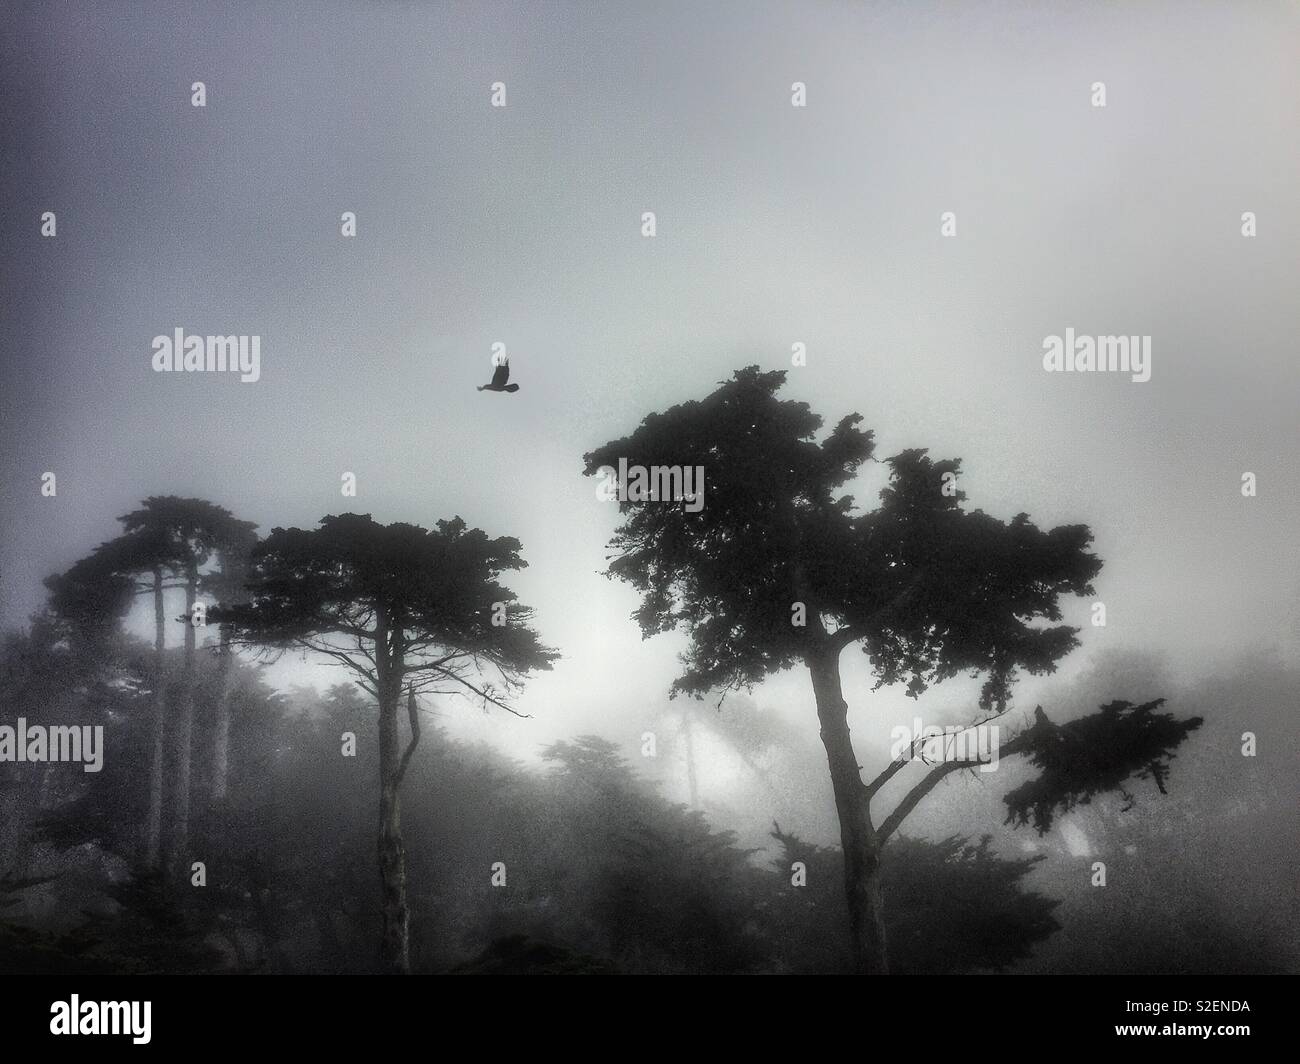 Cypress trees and a crow on a foggy day Stock Photo